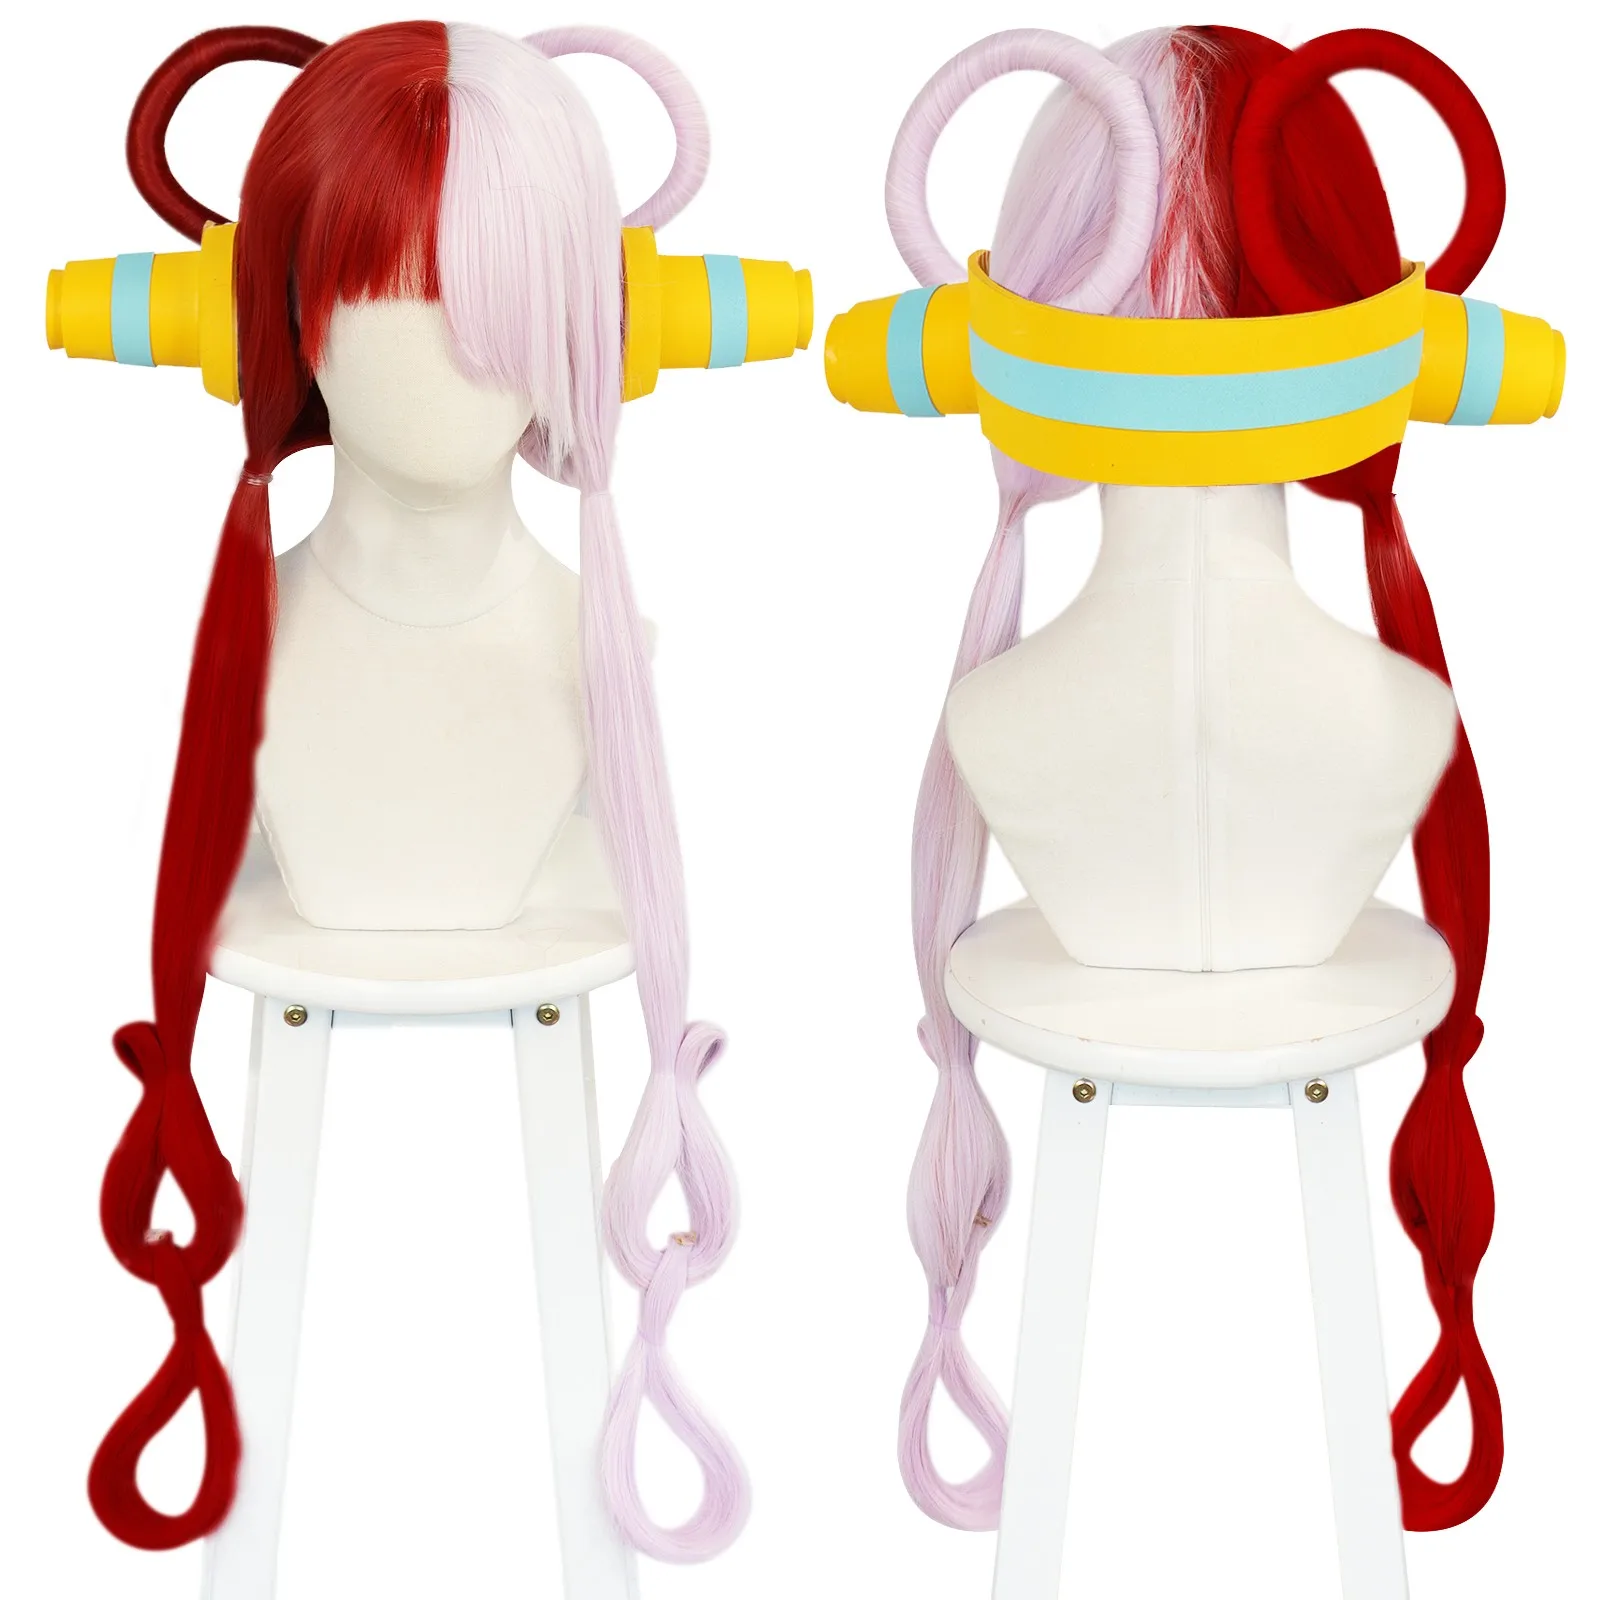 Anogol Synthetic Anime One Piece Film Red Cosplay Wig 90CM Long Half Red And Pink Straight Hair Machine Made for Halloween Party